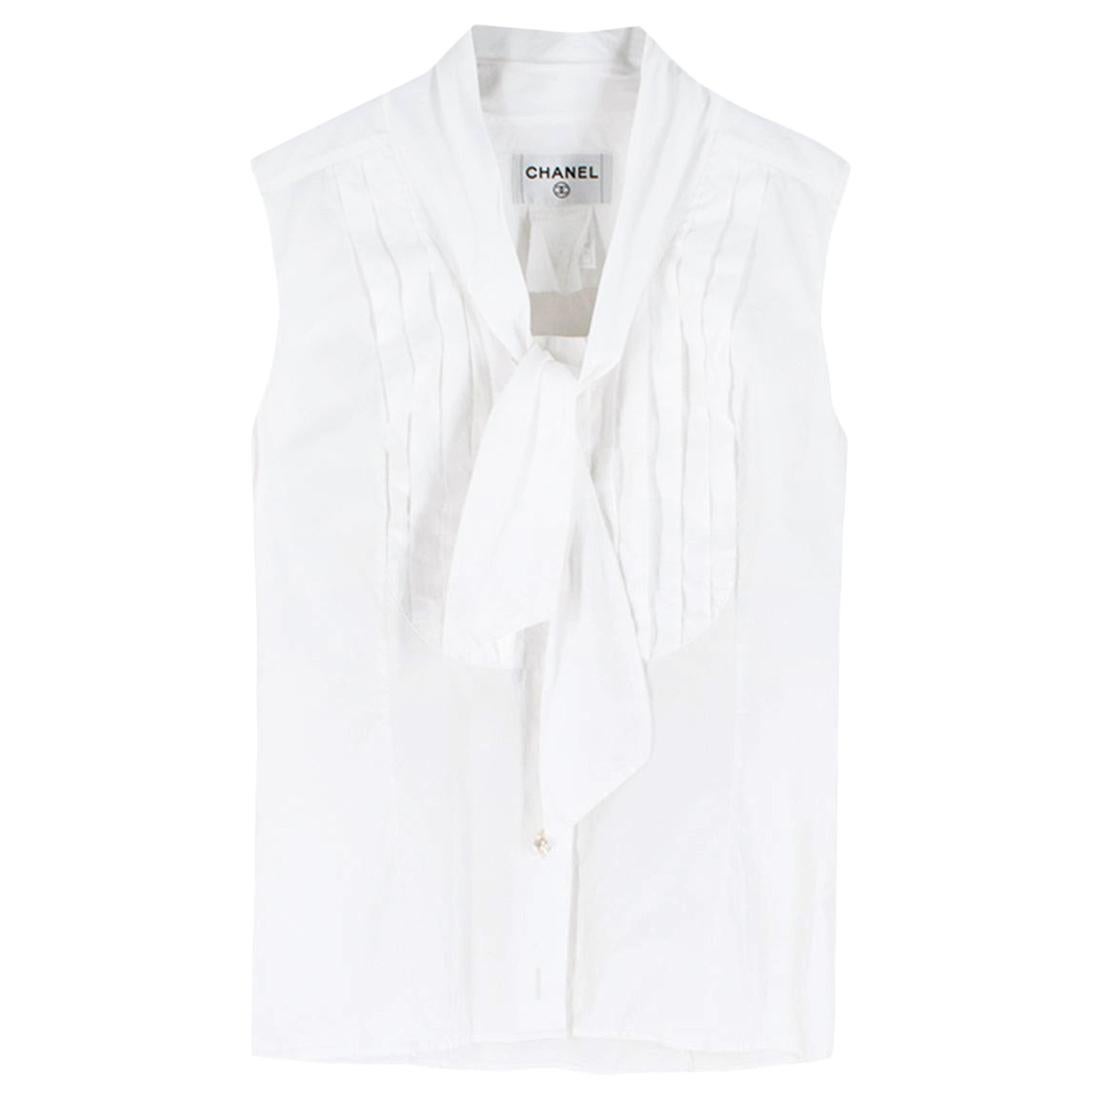 Chanel White Sleeveless Shirt Top -  Size Small For Sale